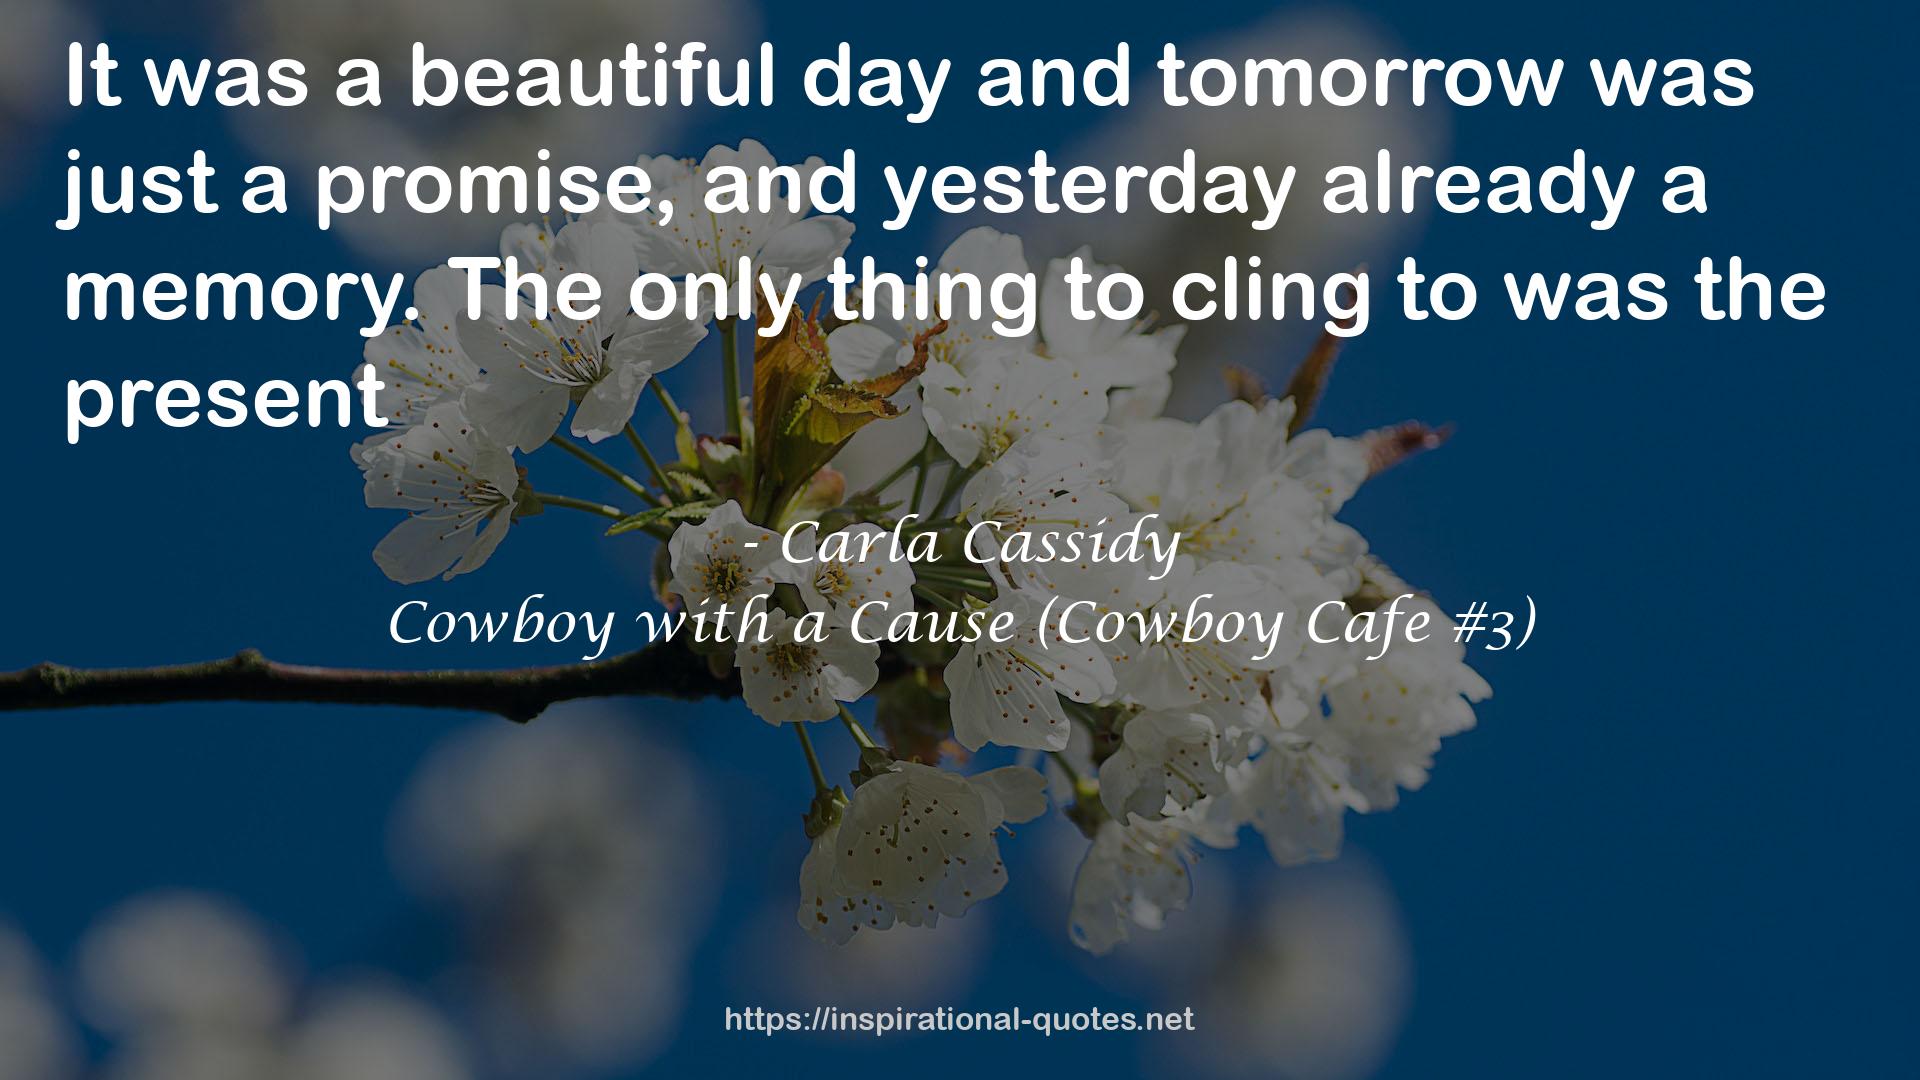 Cowboy with a Cause (Cowboy Cafe #3) QUOTES